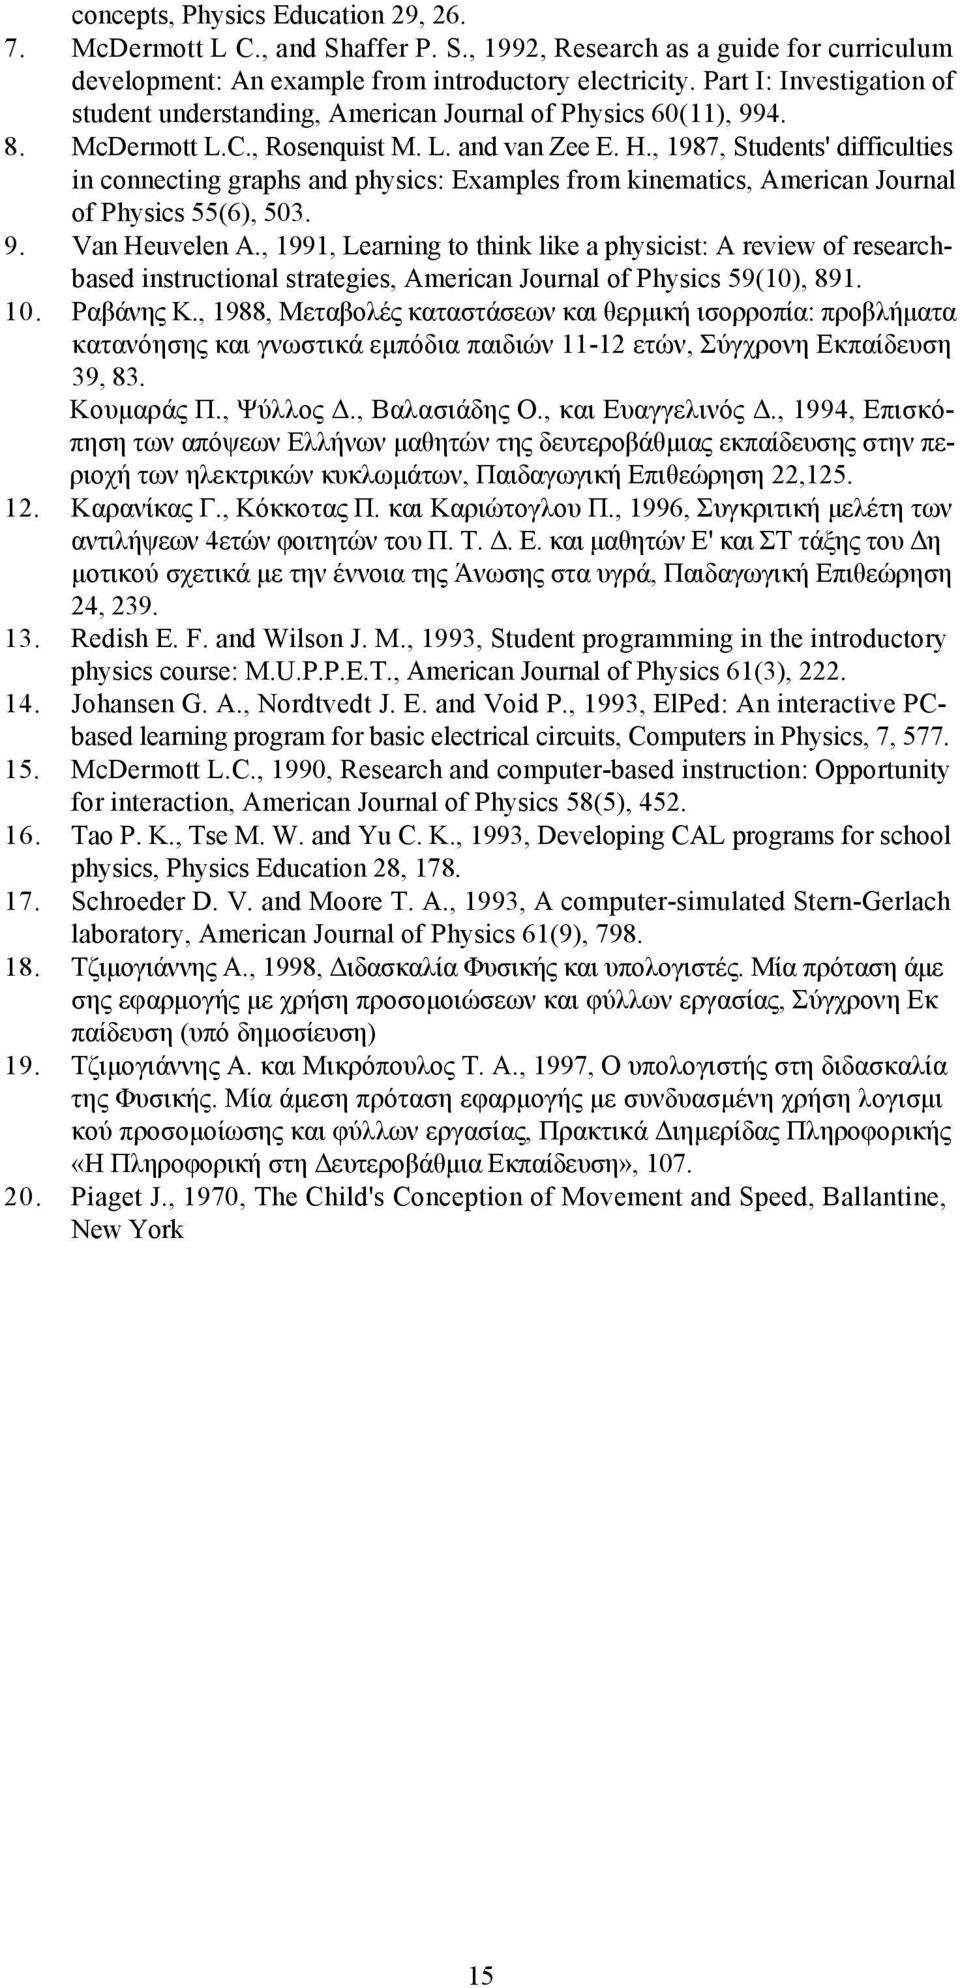 , 1987, Students' difficulties in connecting graphs and physics: Examples from kinematics, American Journal of Physics 55(6), 503. 9. Van Heuvelen A.